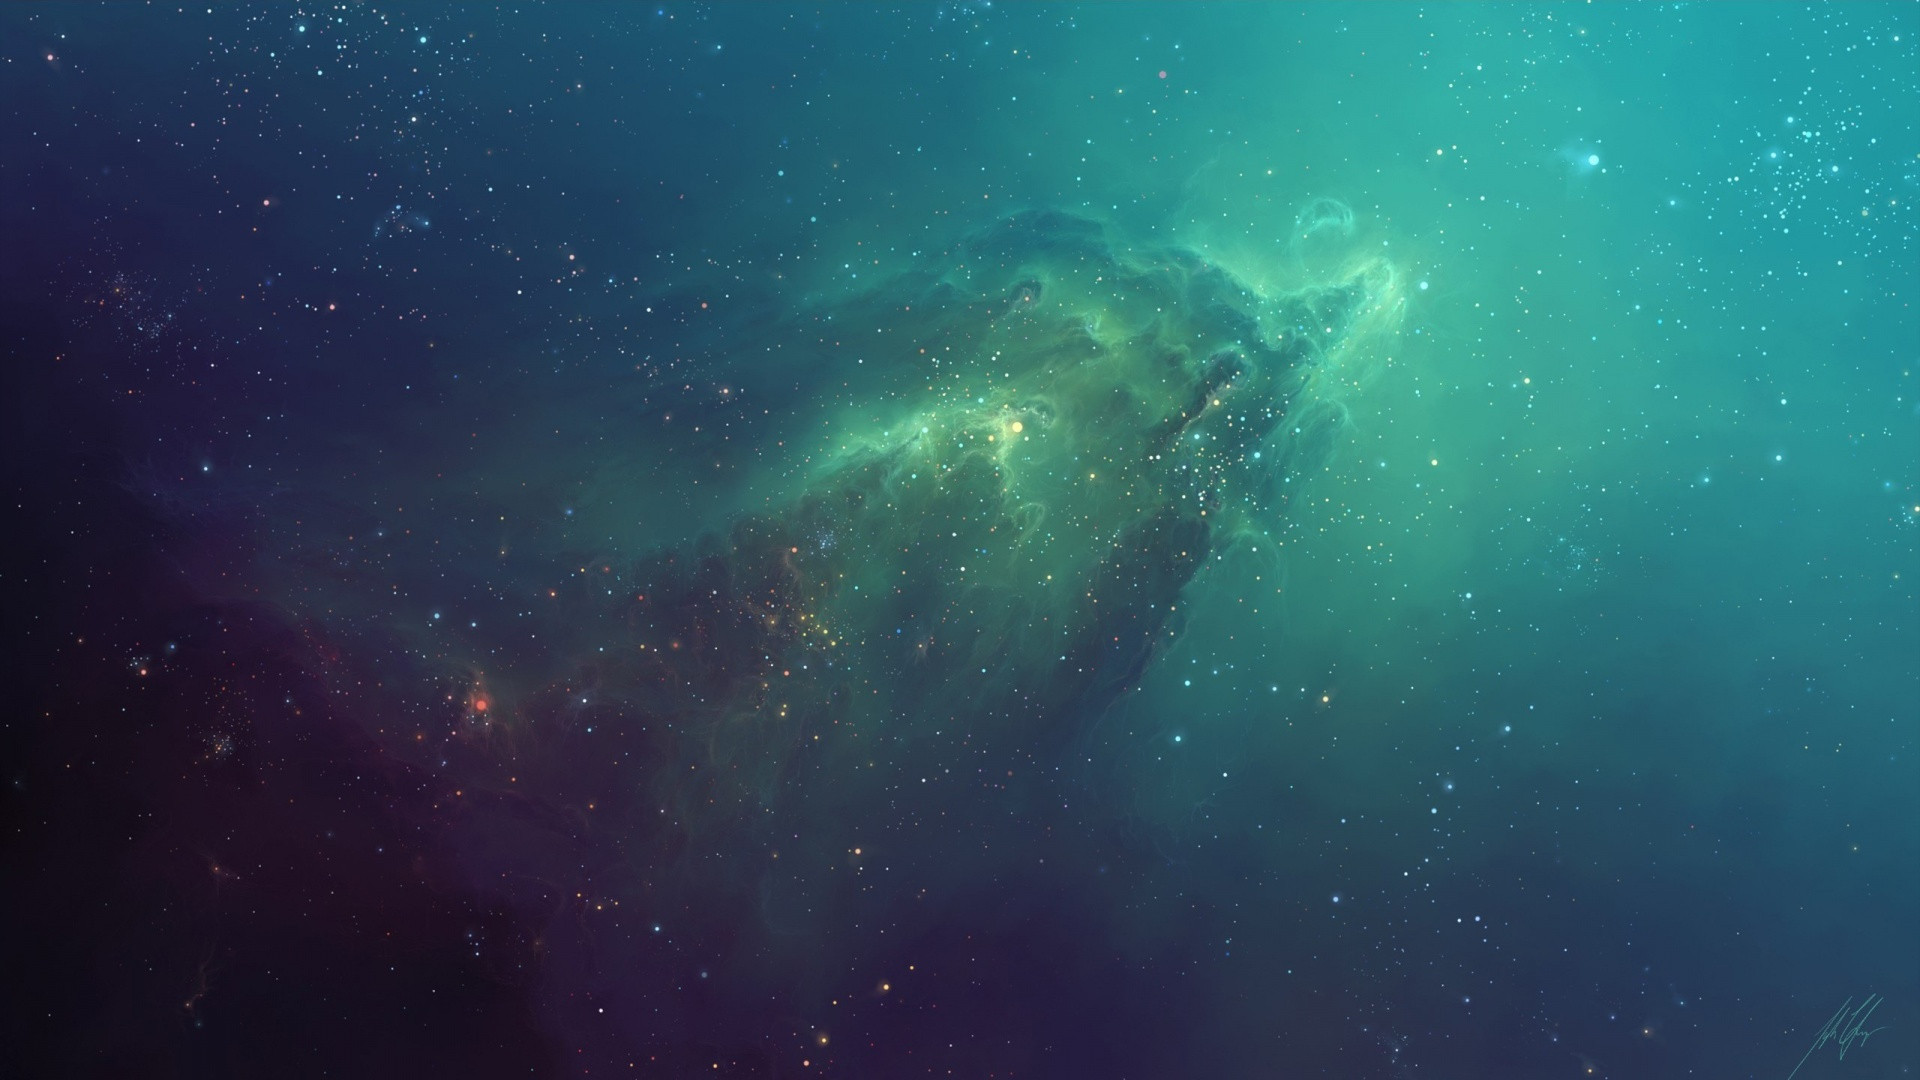 If you like nebula wallpapers similar to this, here is one I've been using on my MBP: 1920x1080